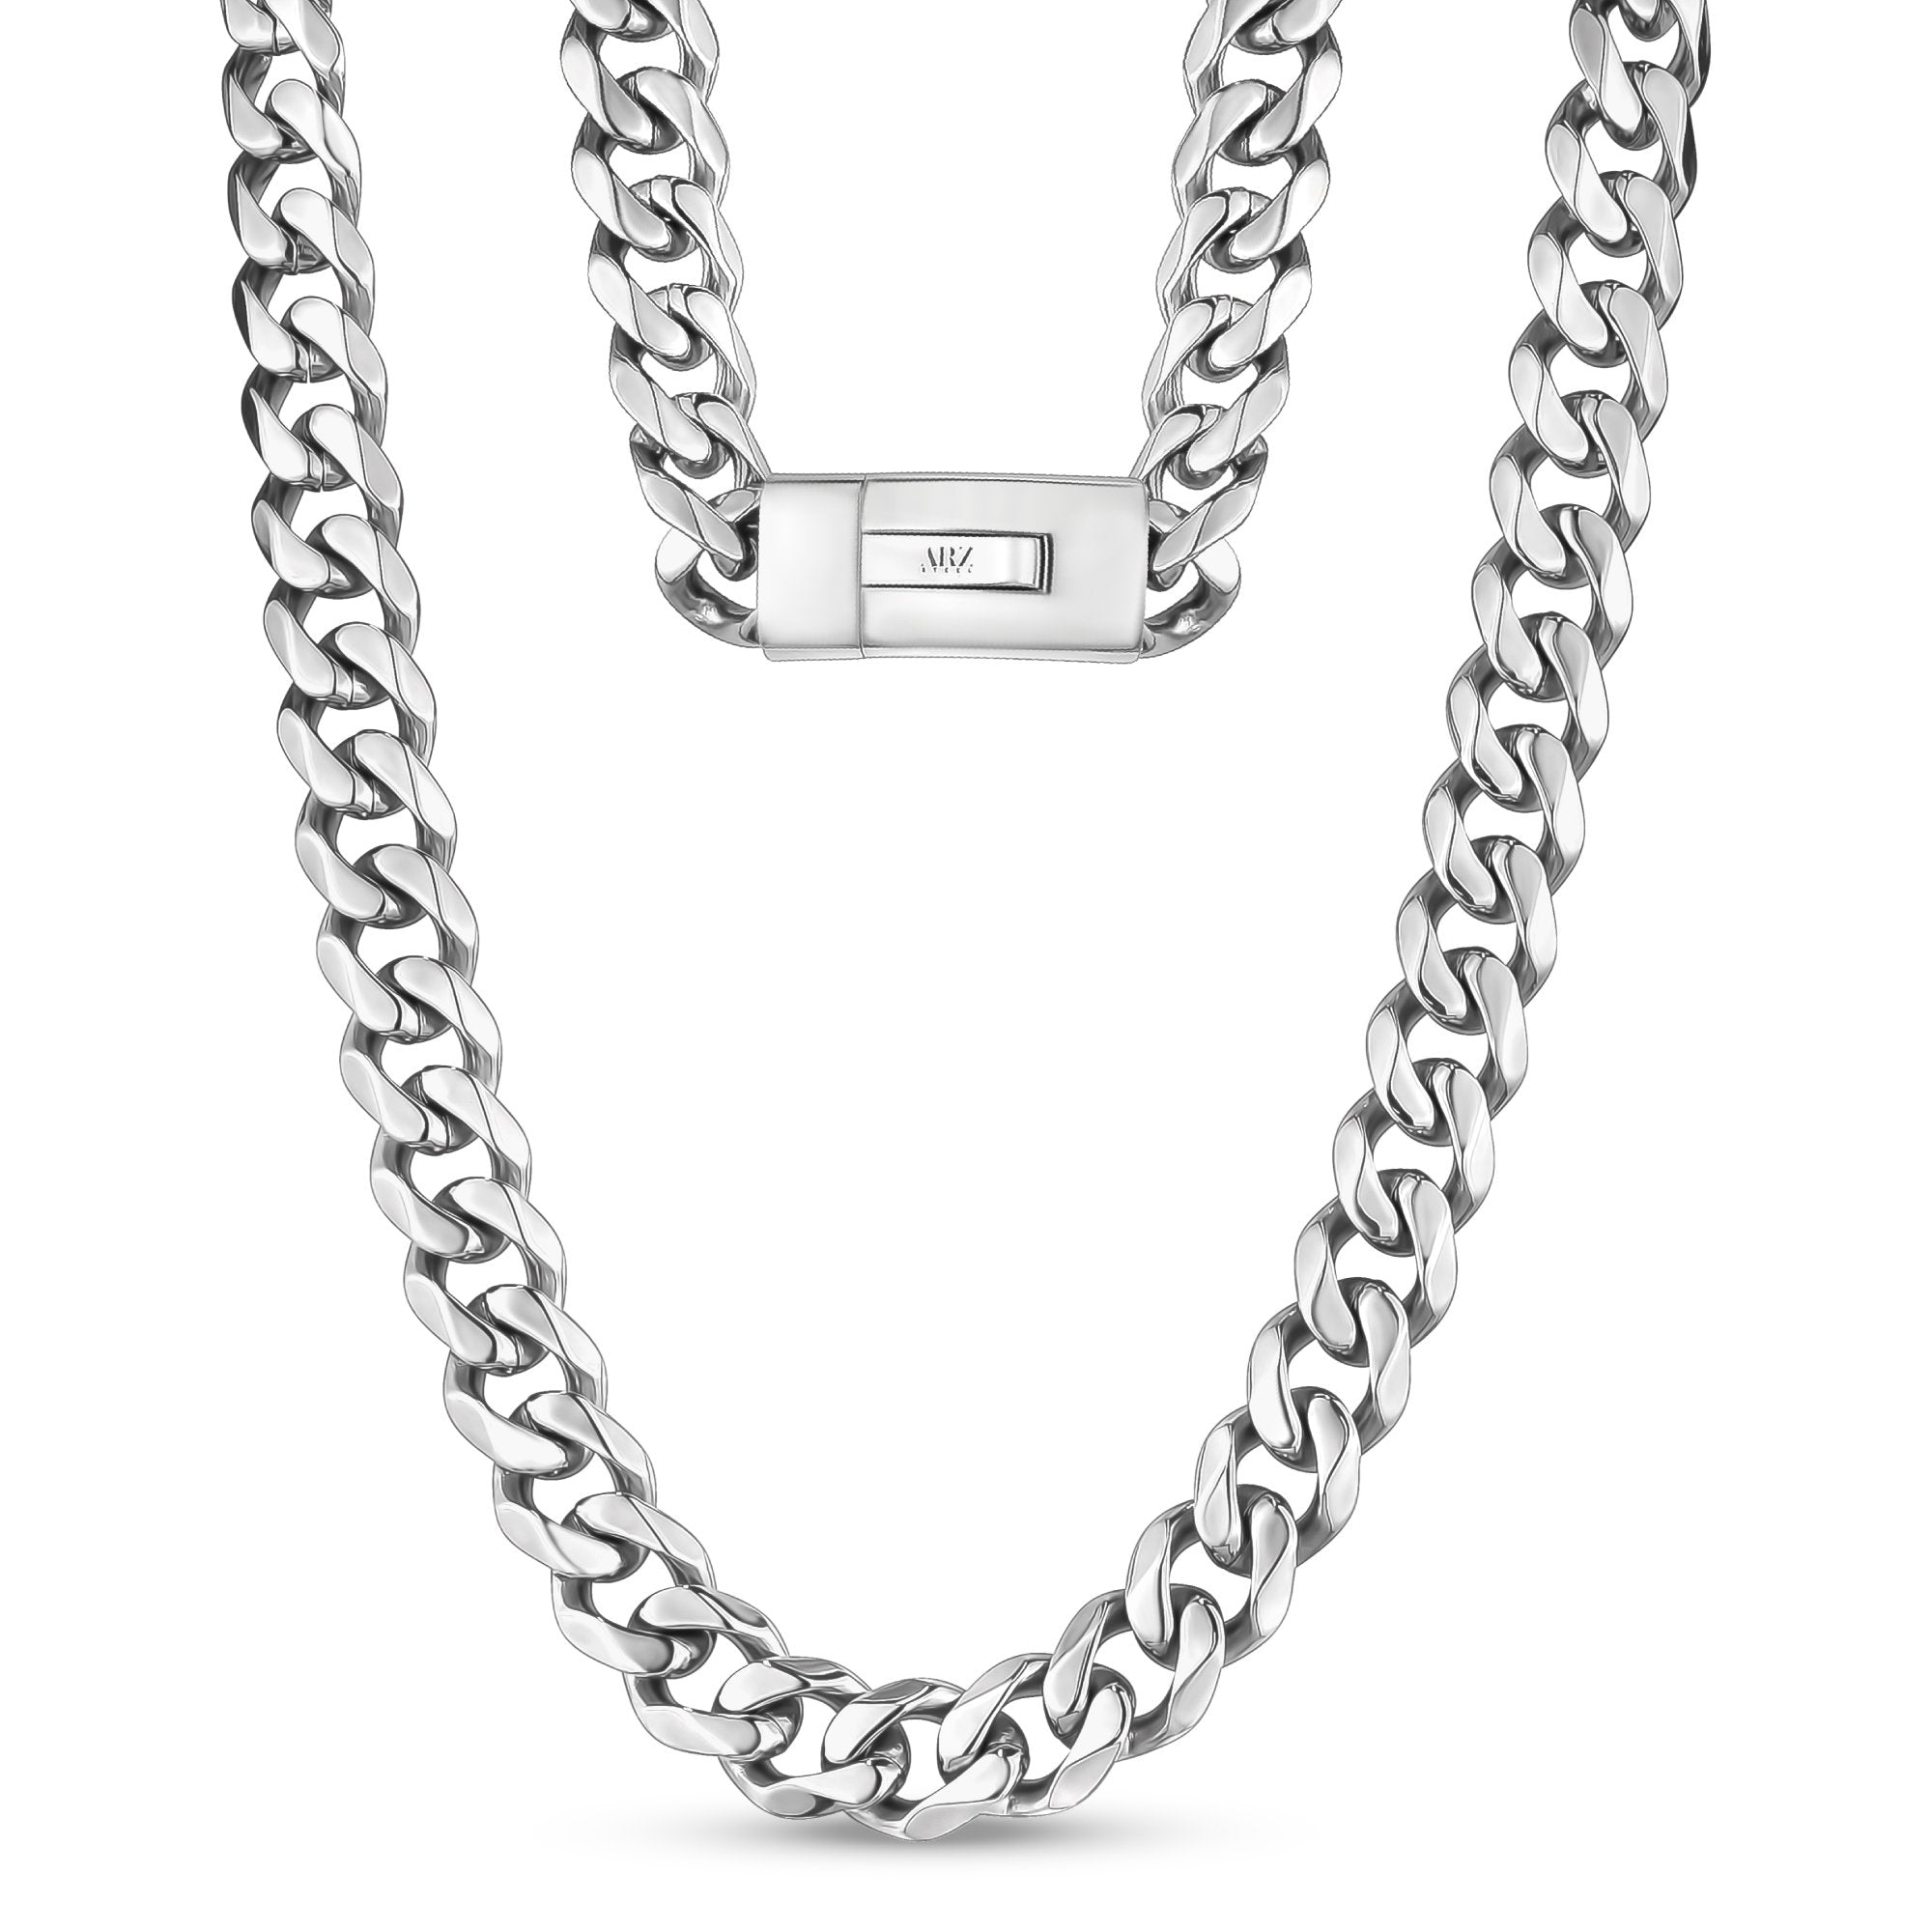 Mens Thanksgiving Day Jewelry: Middle Eastern Style 18k Gold Figaro Chain  Link Mens Gold Chain Necklace In 316L Stainless Steel Perfect Fathers Day  Gift 6mm Width From Charmspendant, $9.05 | DHgate.Com